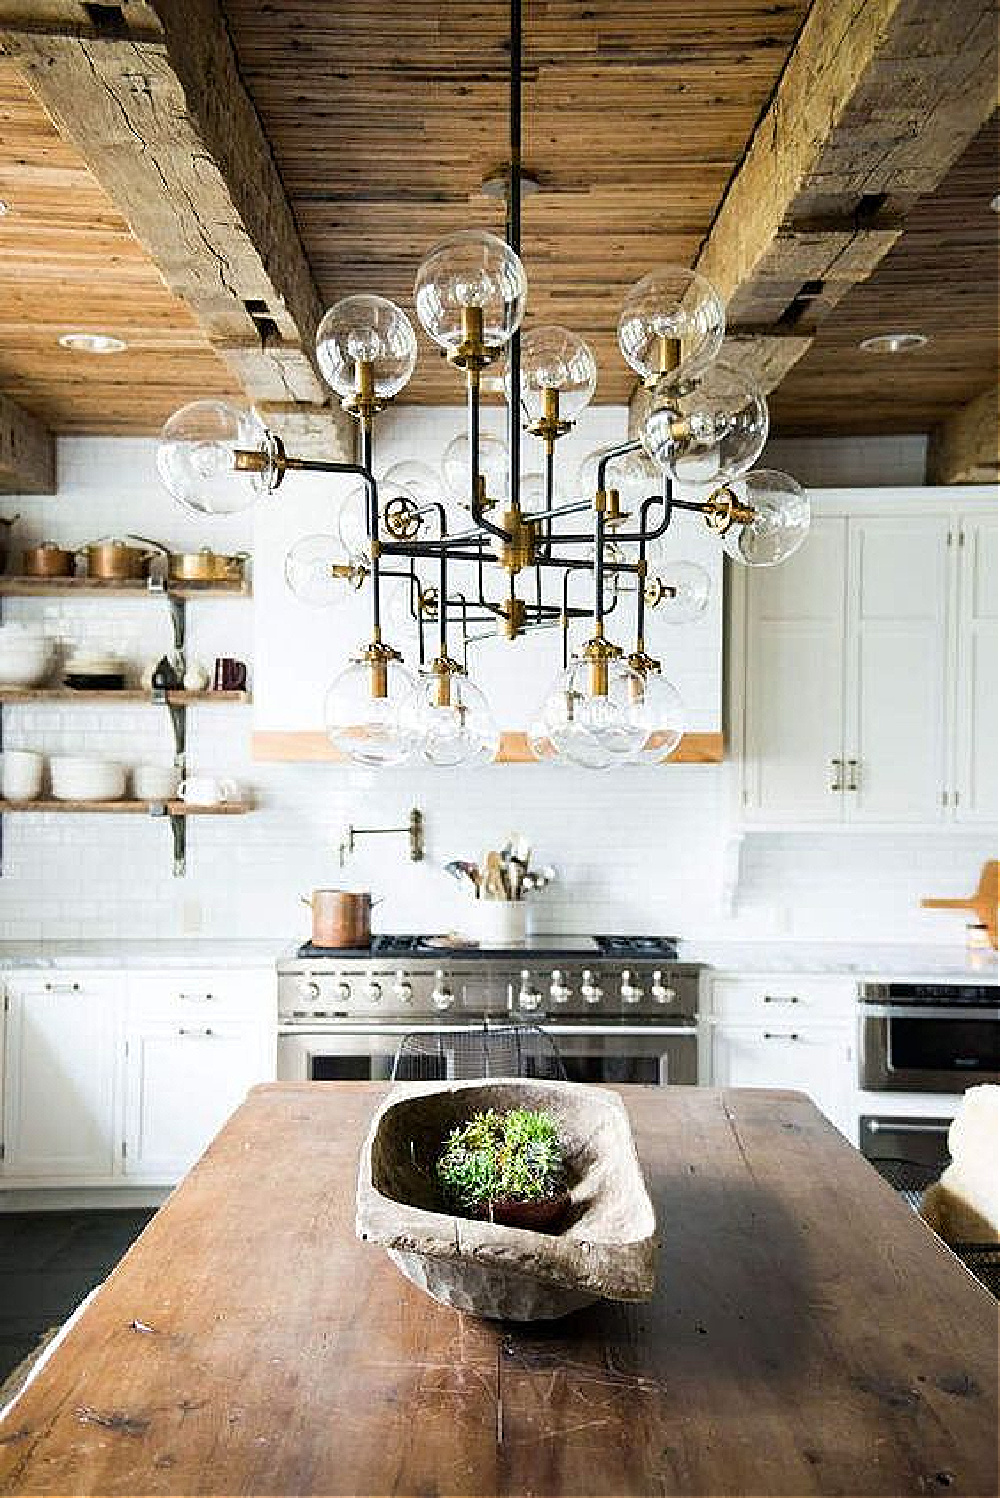 Leanne Ford rustic modern farmhouse kitchen with rugged wood ceiling beams, Sputnik chandelier over farm table, white cabinets, and stainless appliances.